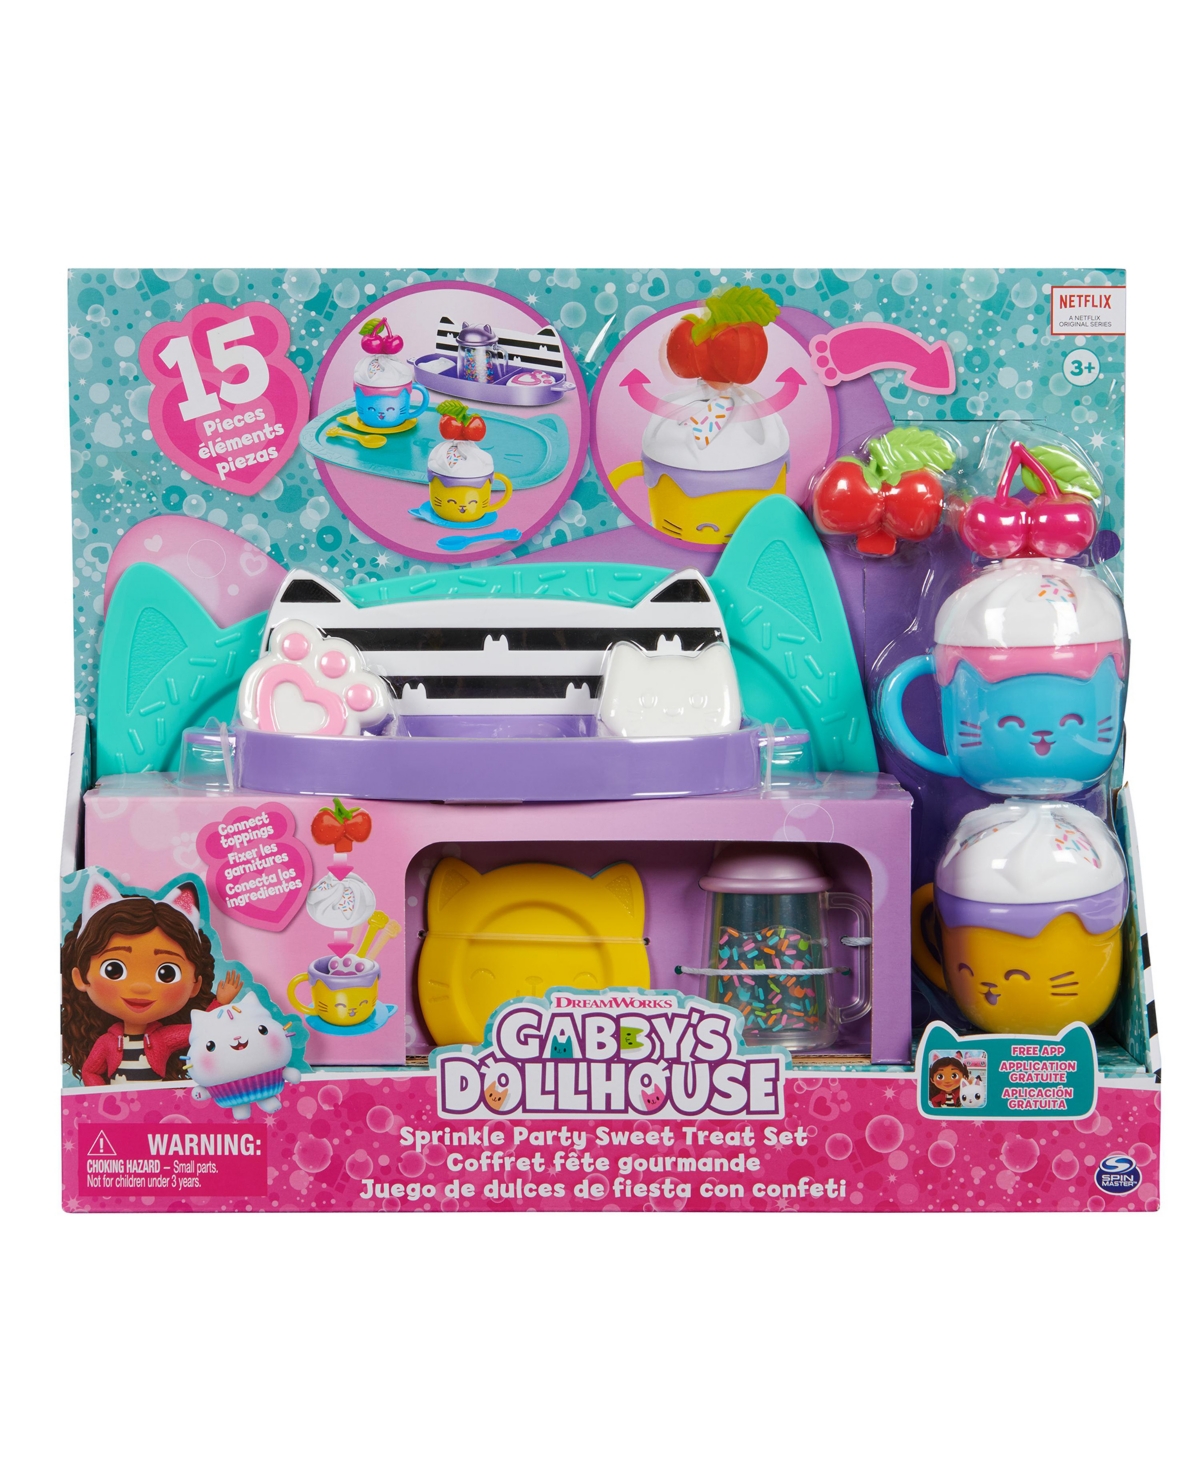 Shop Gabby's Dollhouse , Sprinkle Party Sweet Treat Set, Pretend Play Kitchen Hot Cocoa Party Set With Fruit Sprinkles In Multi-color